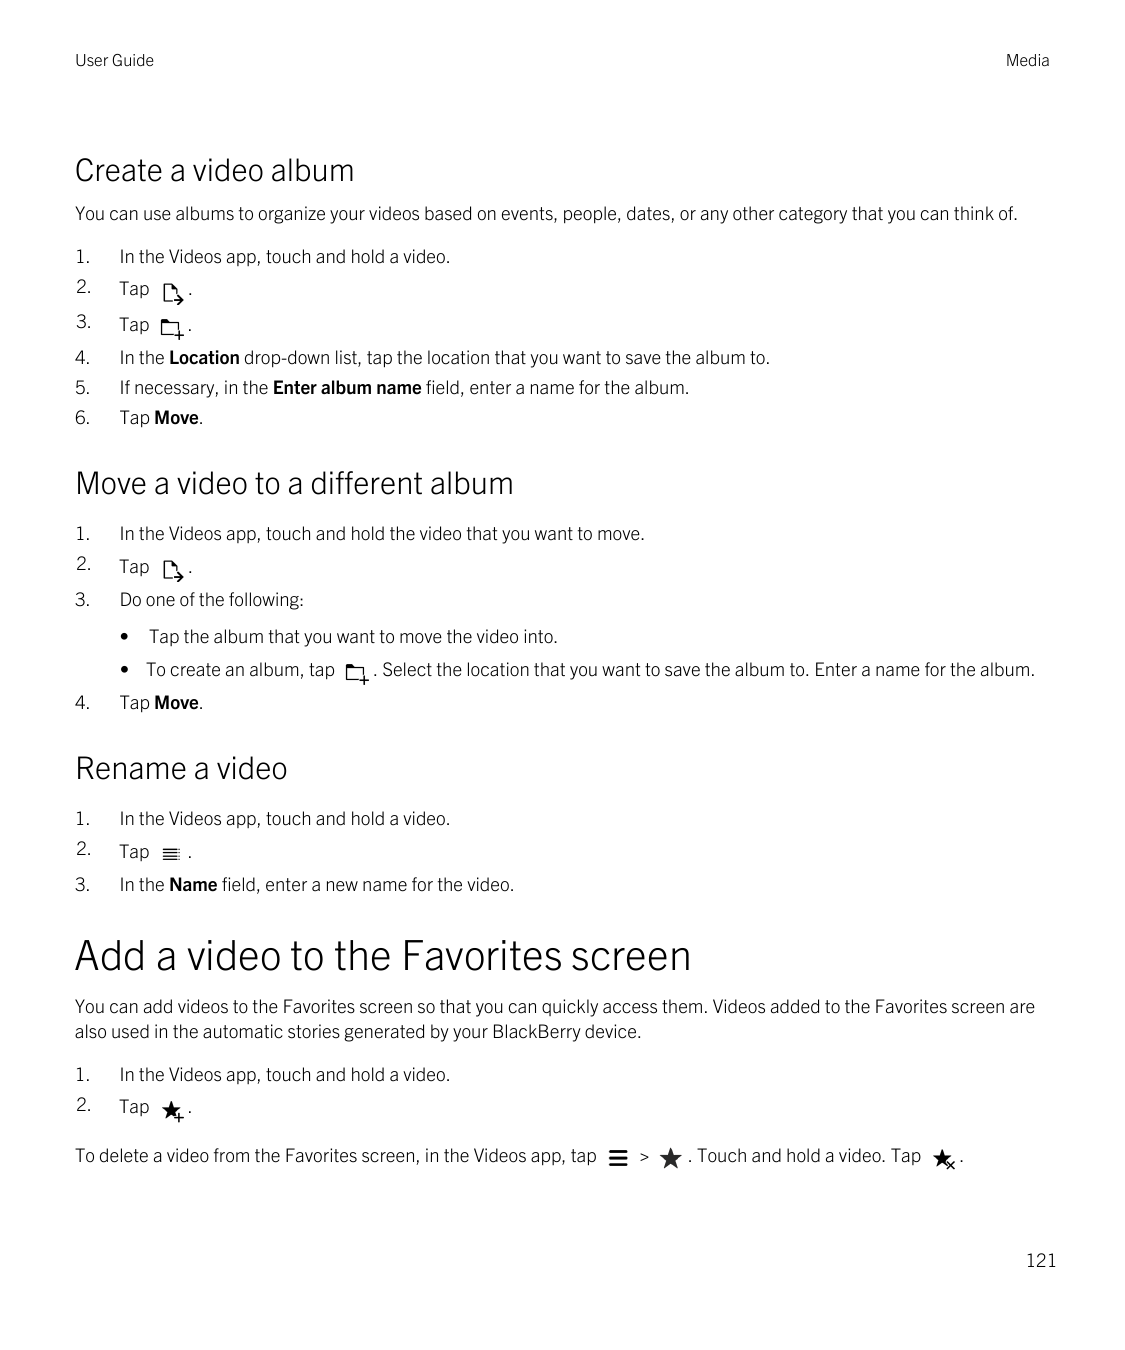 User GuideMediaCreate a video albumYou can use albums to organize your videos based on events, people, dates, or any other categ